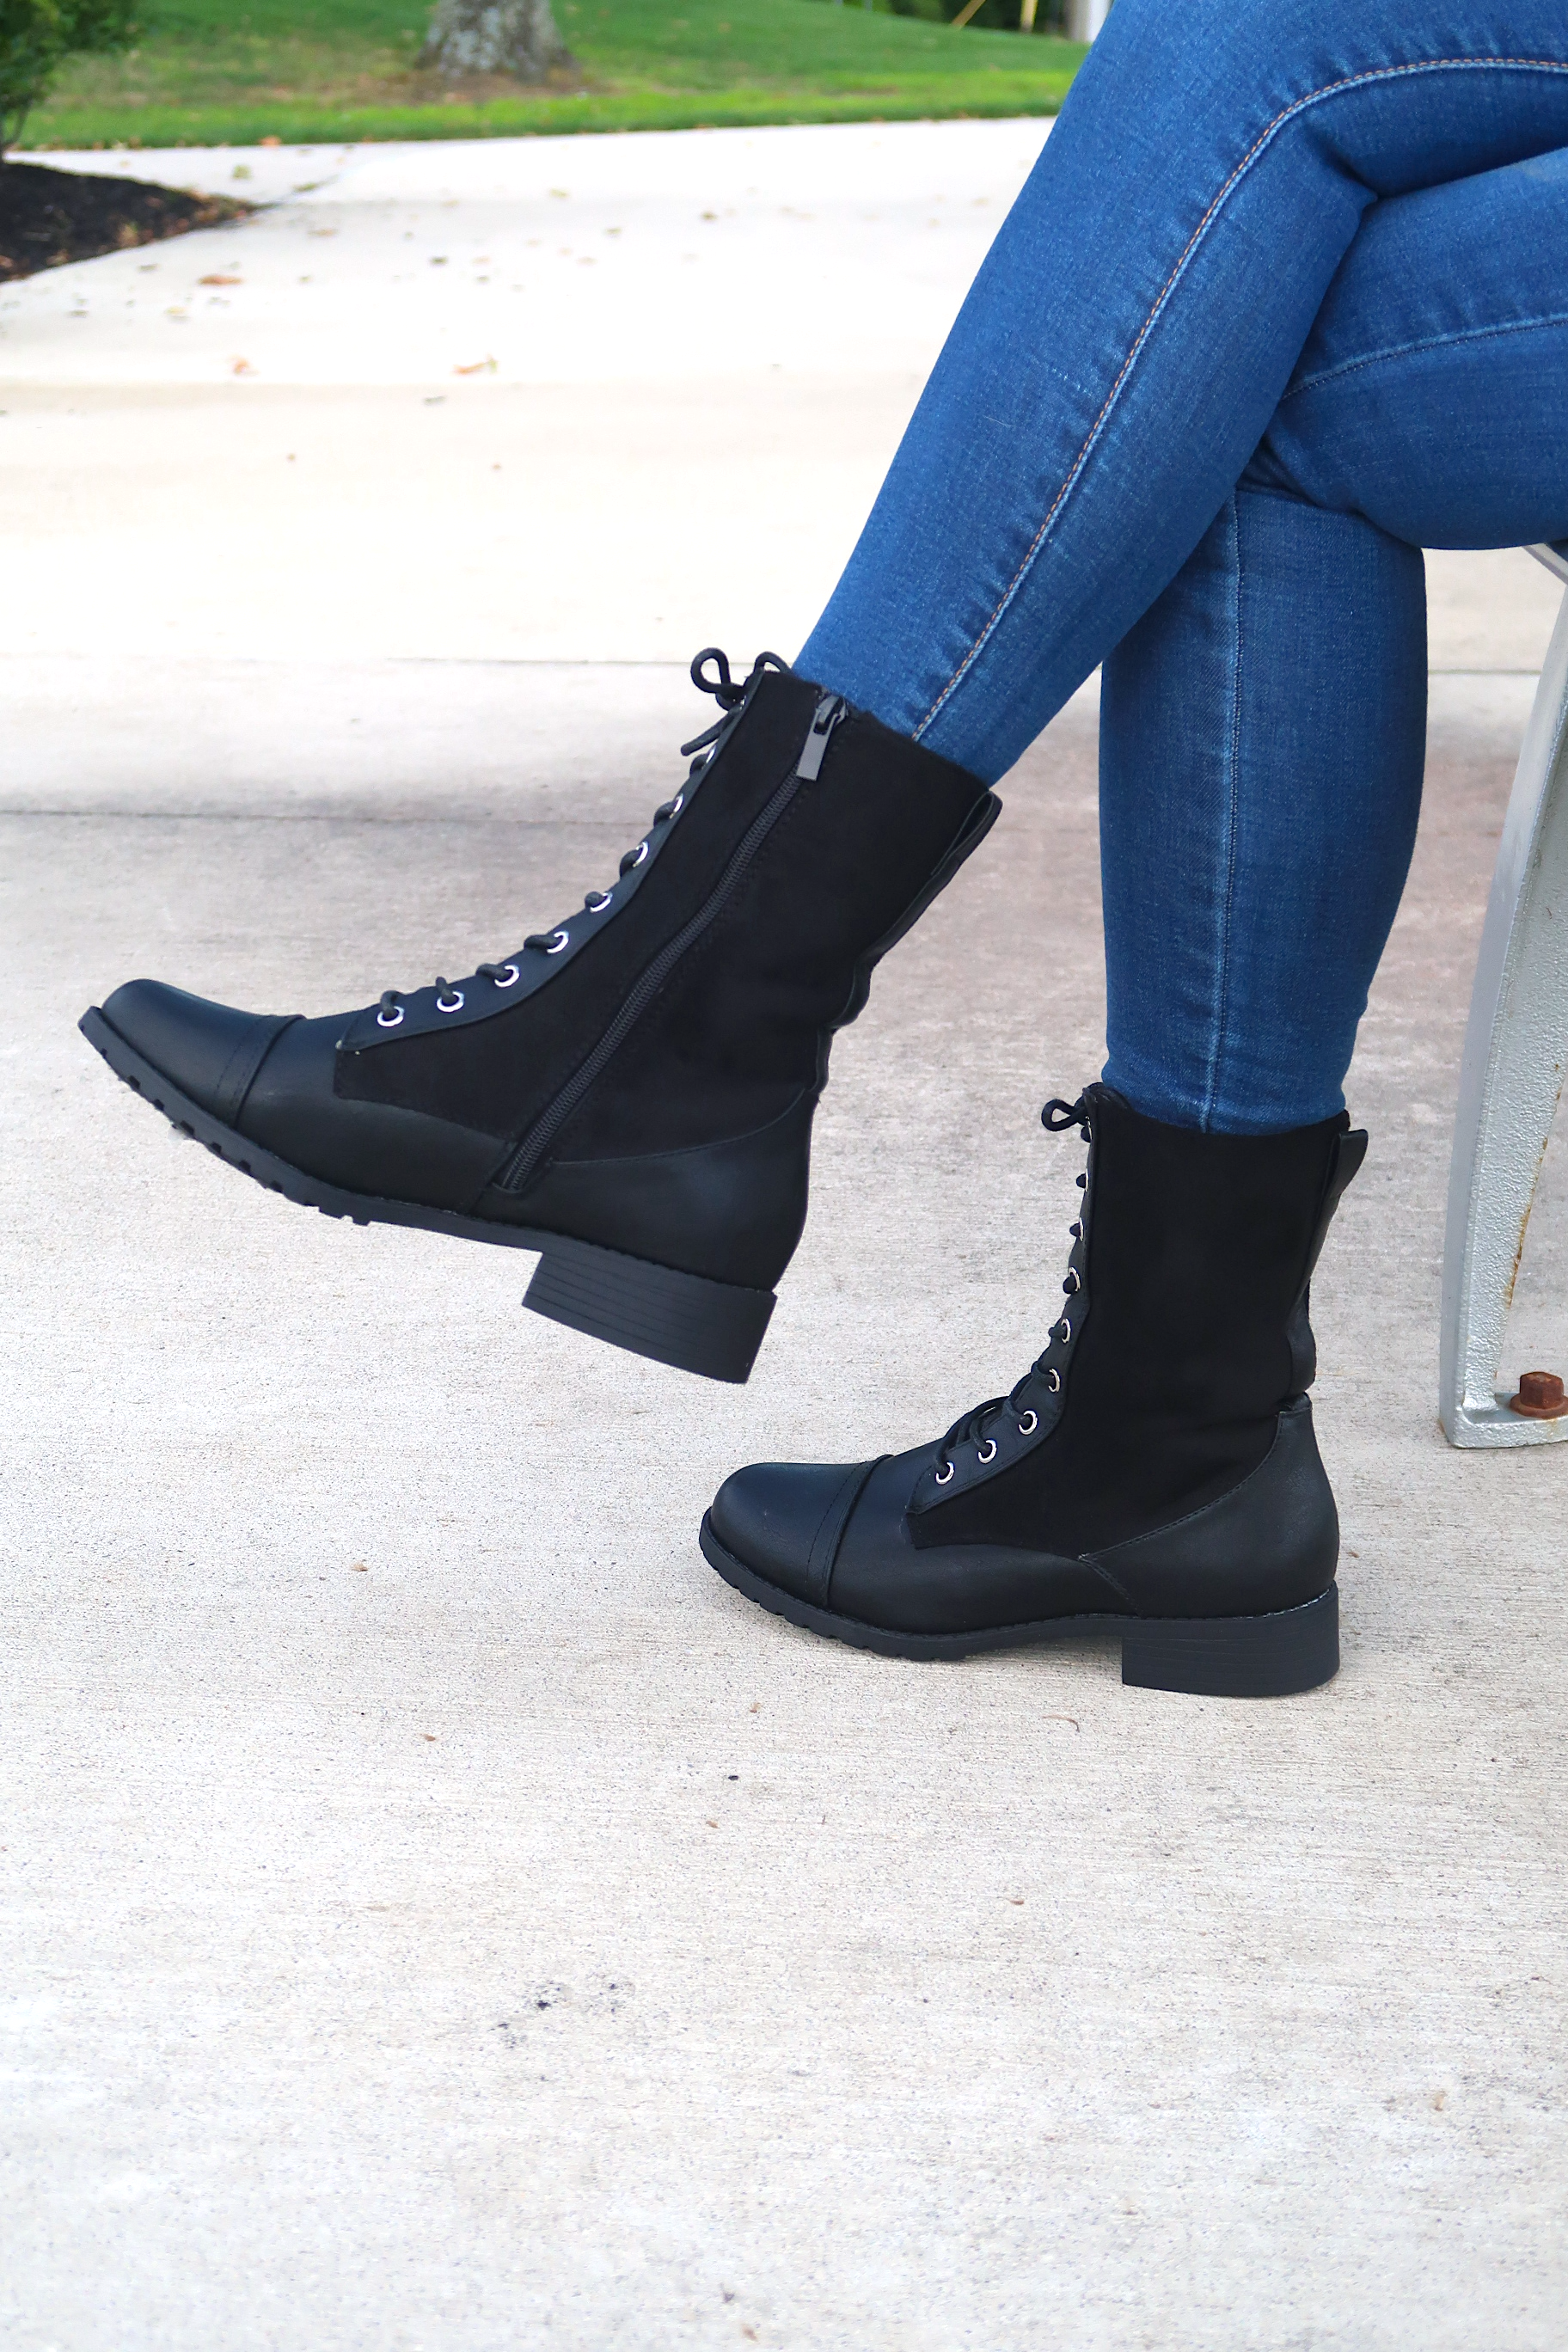 Cheap Fashion Rivets Black Heeled Boots for Women Autumn Lace Up and Zipper  Women's Chunky Combat Boots Platform Heels 90s Goth | Joom